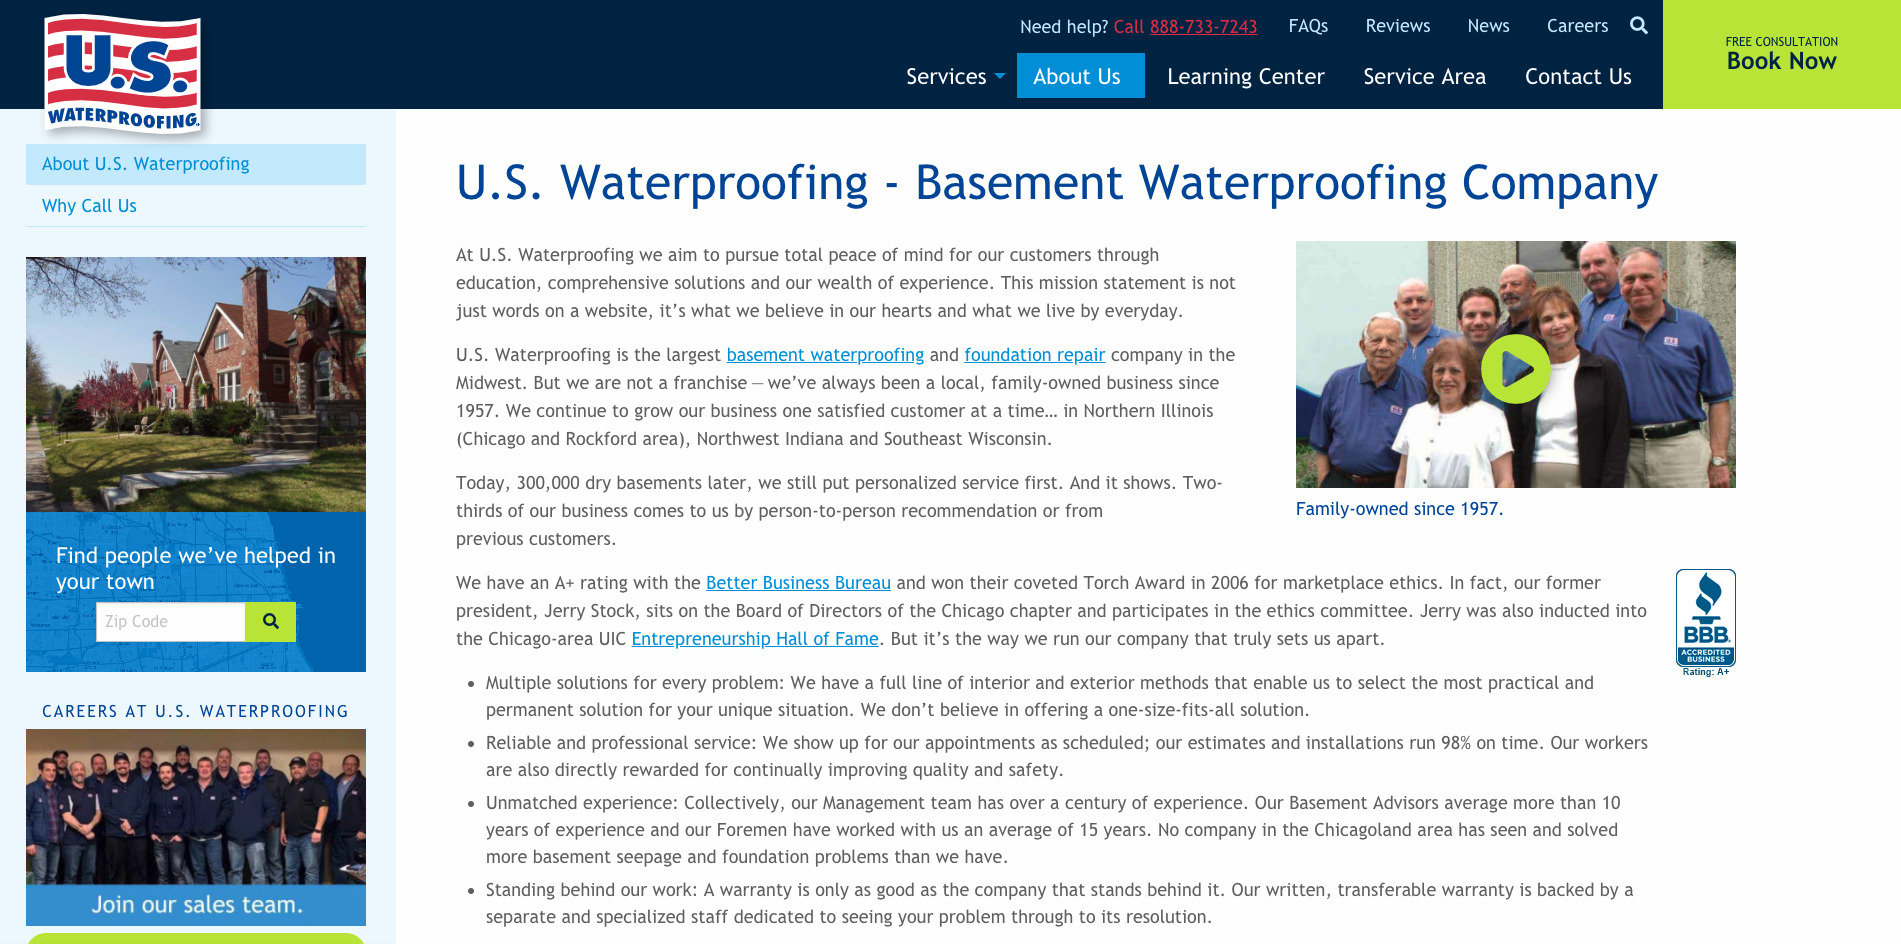 U.S. Waterproofing's About page video 